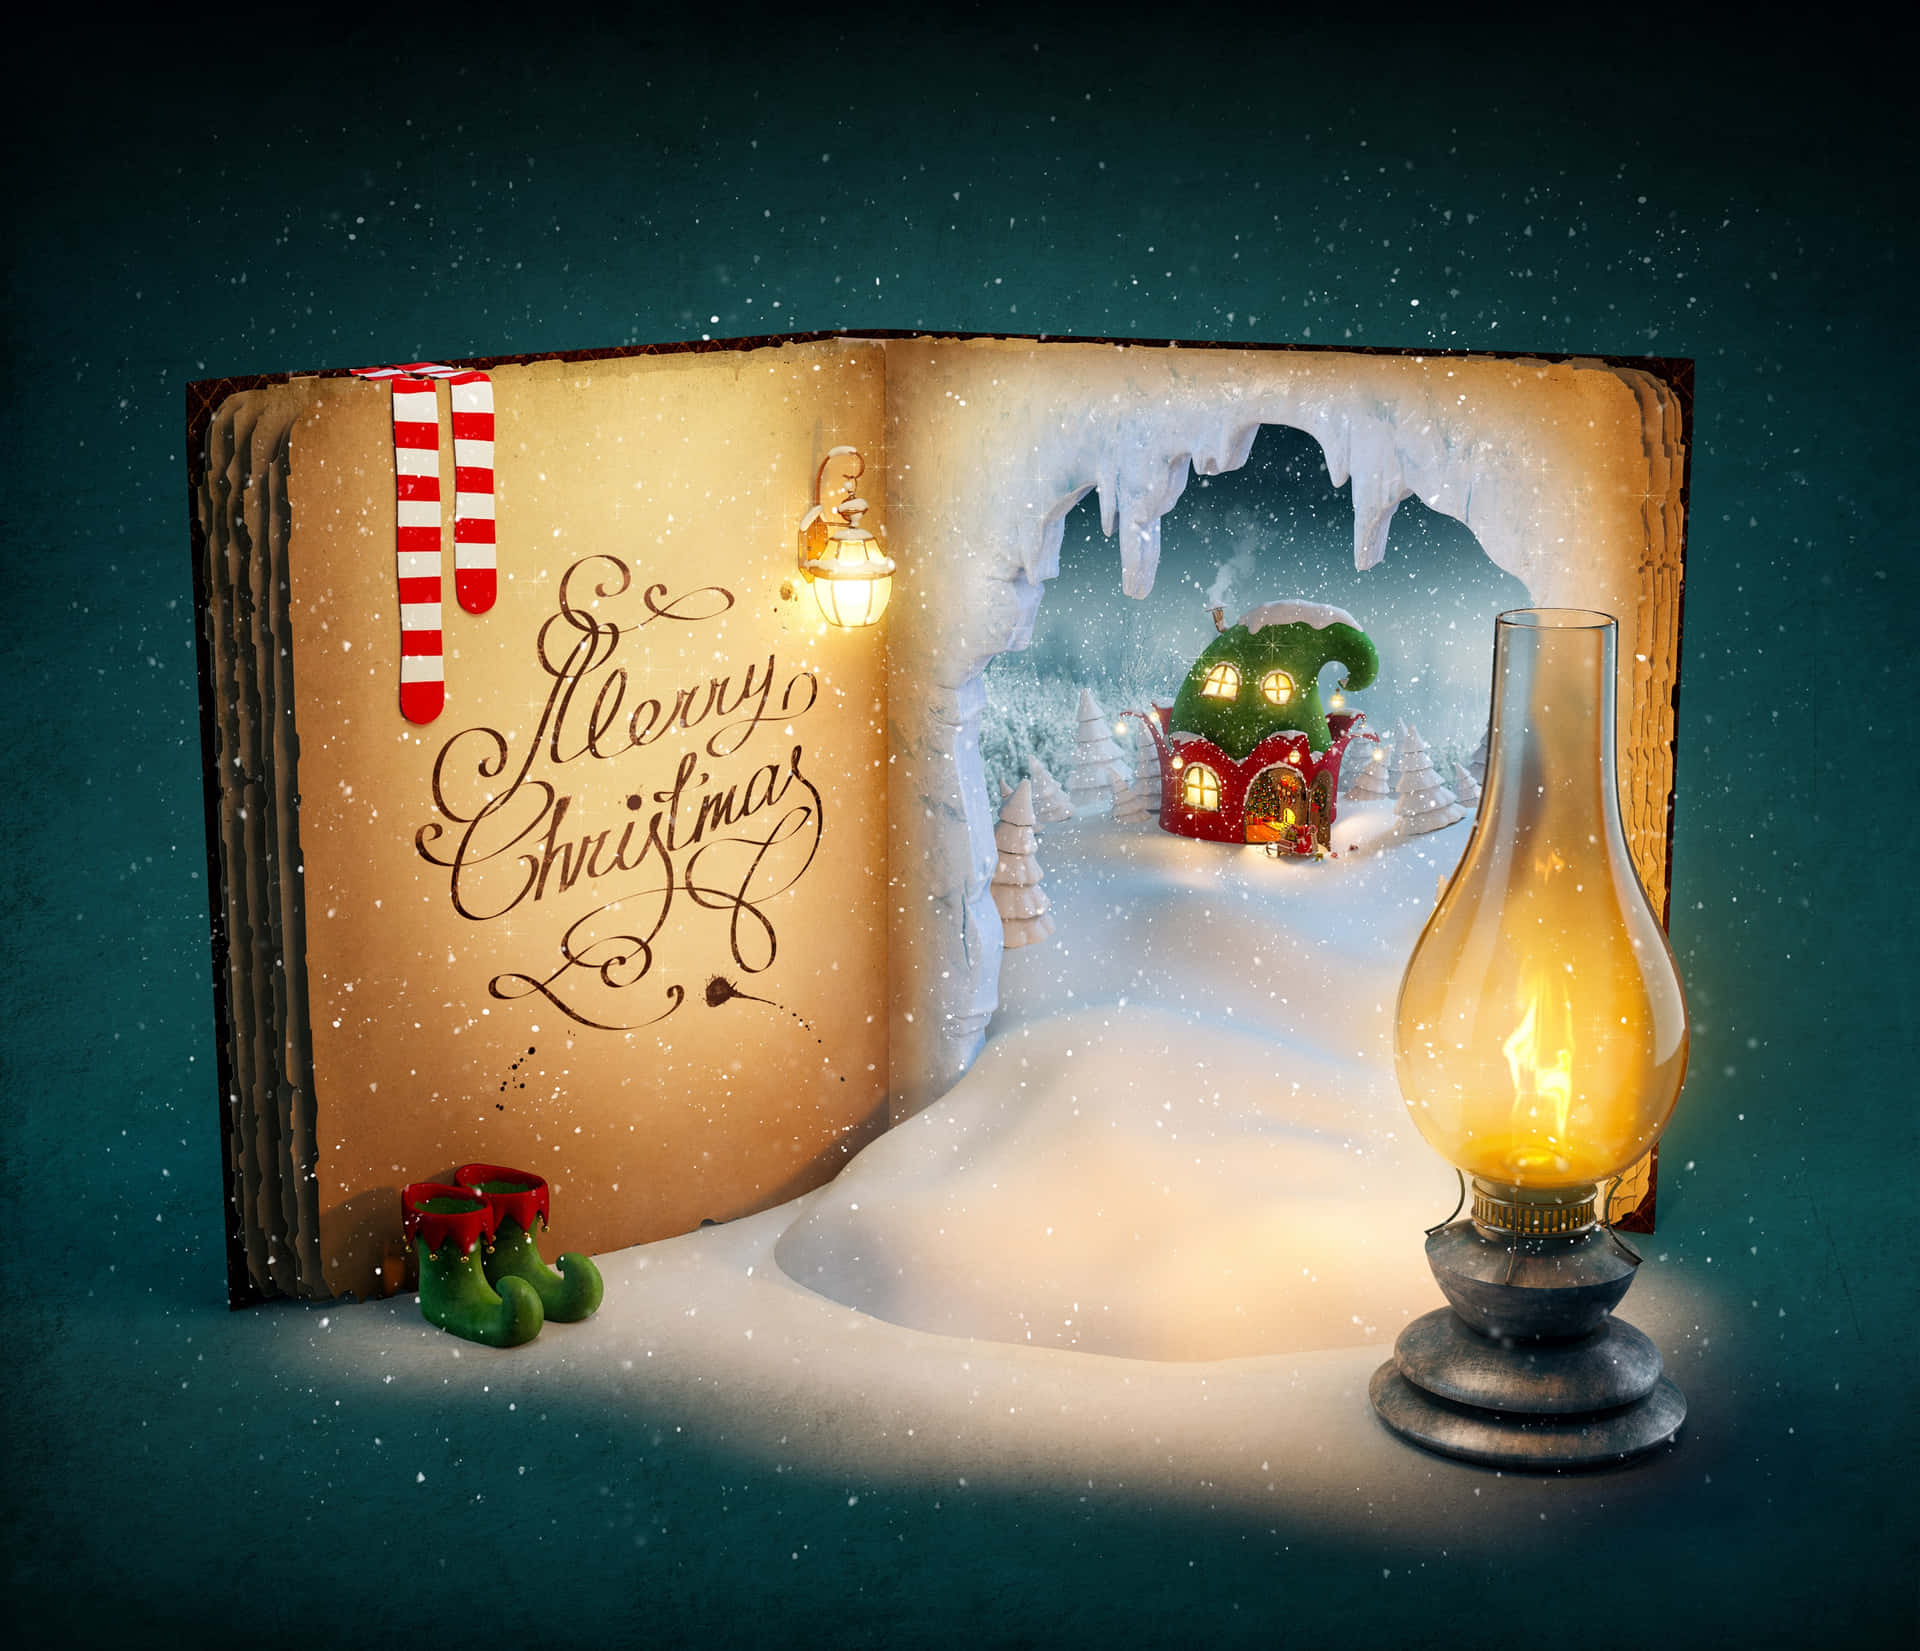 Let the magic of winter bring joy to you and your loved ones. Wallpaper